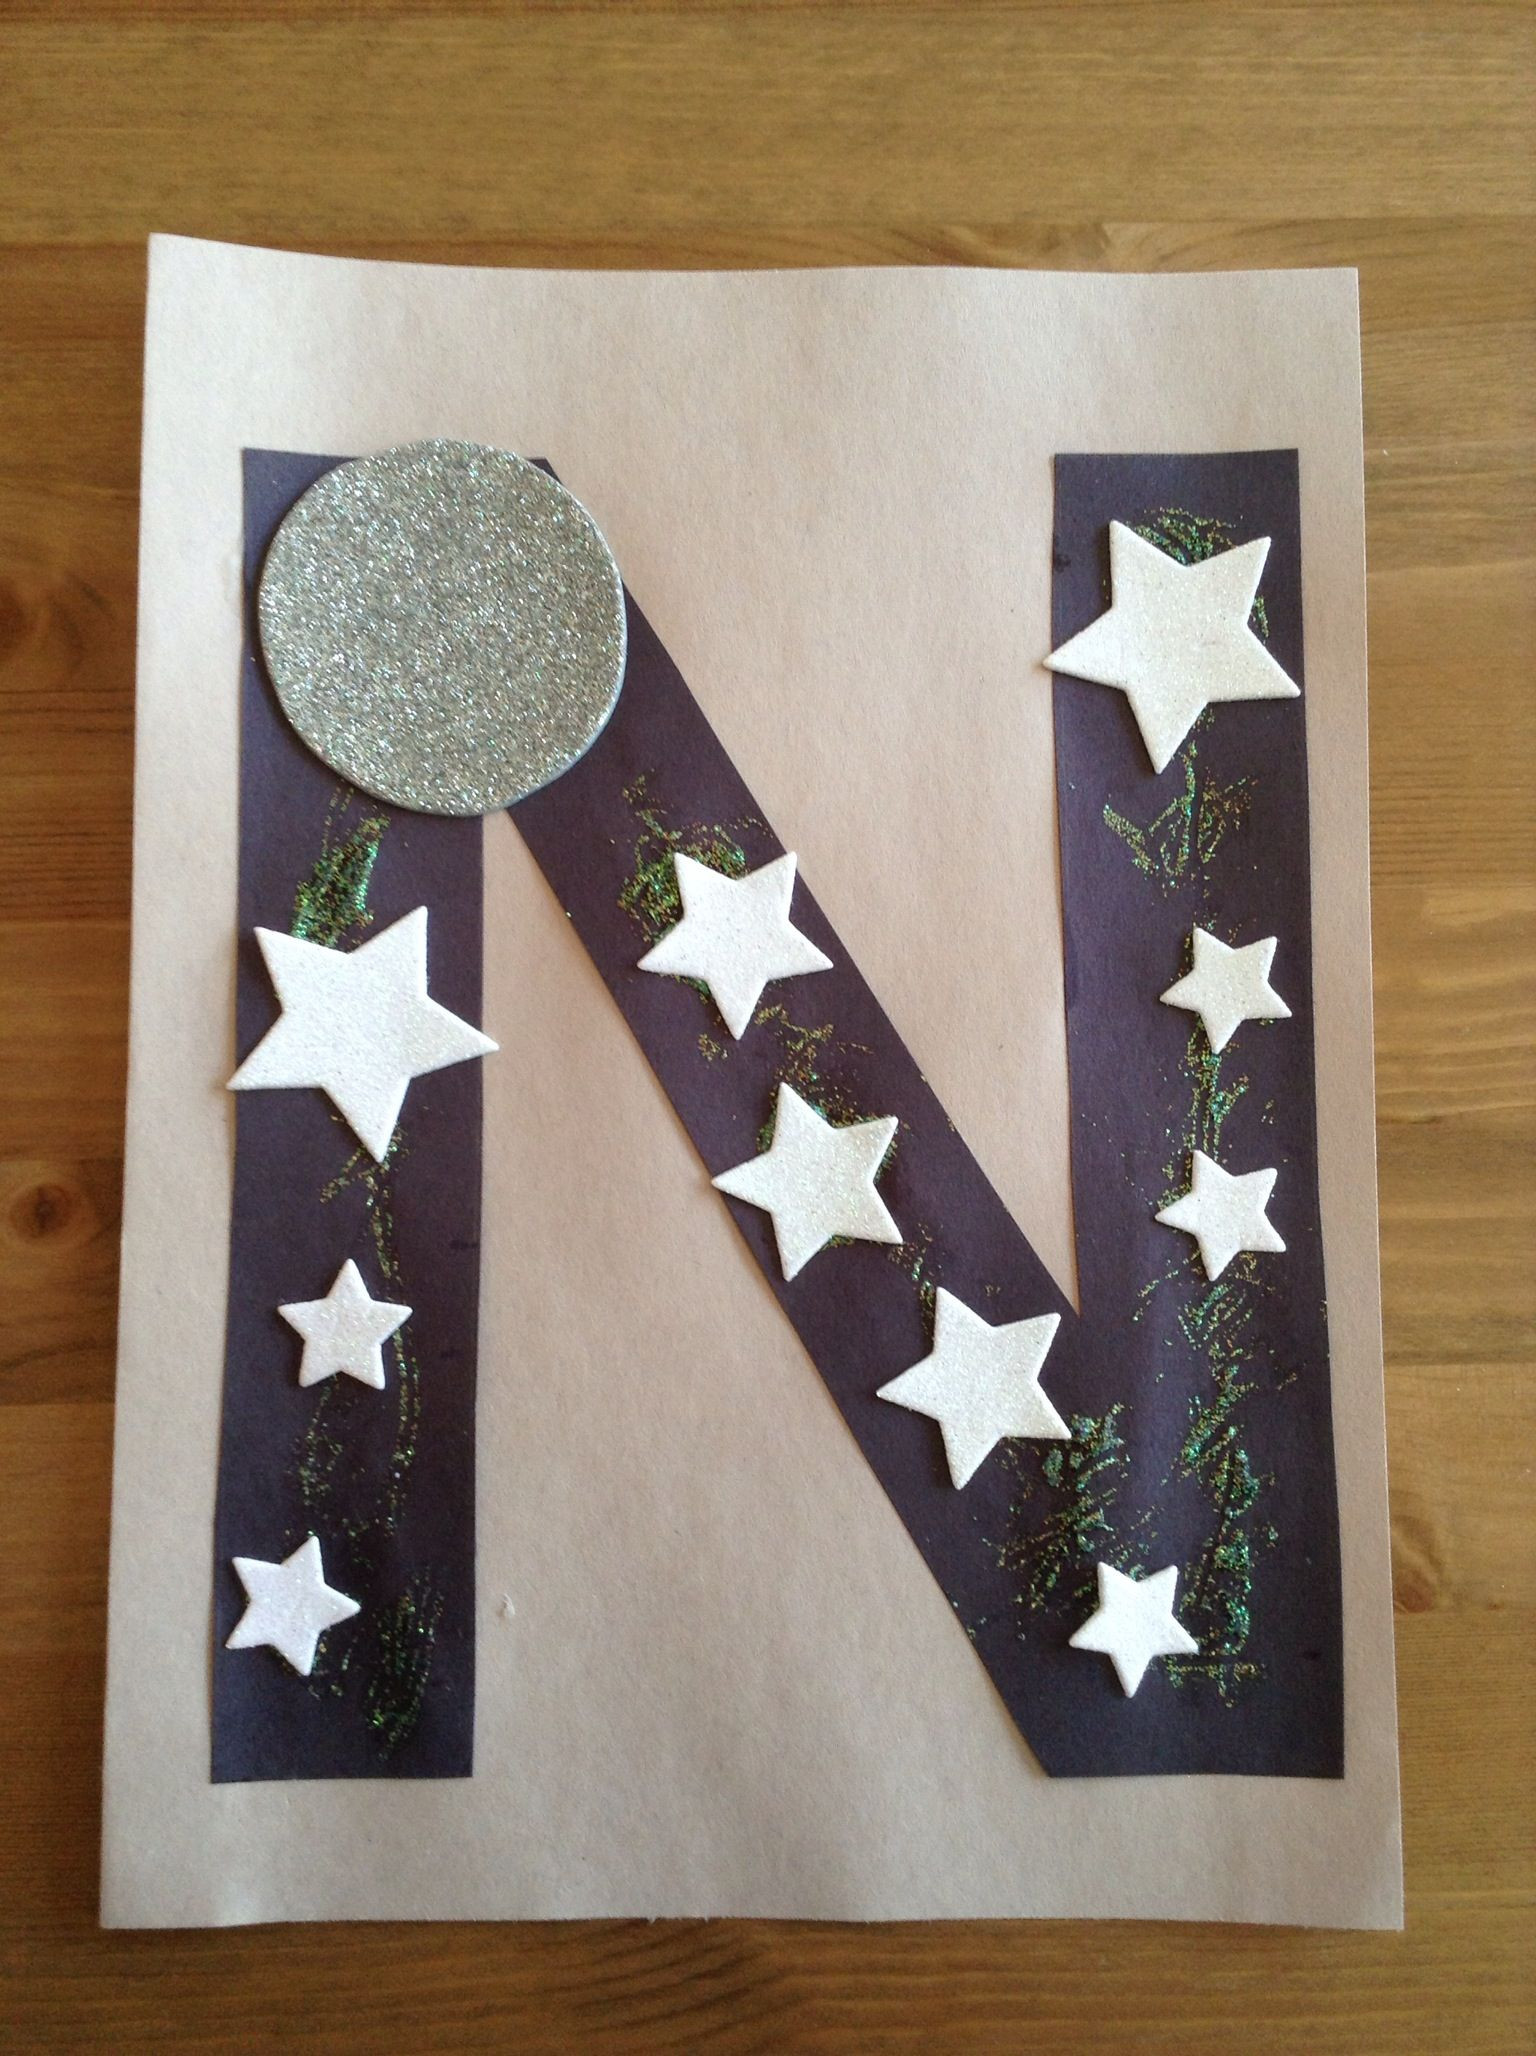 Art N Crafts For Toddlers
 N is for Night Craft Preschool Craft Letter of the